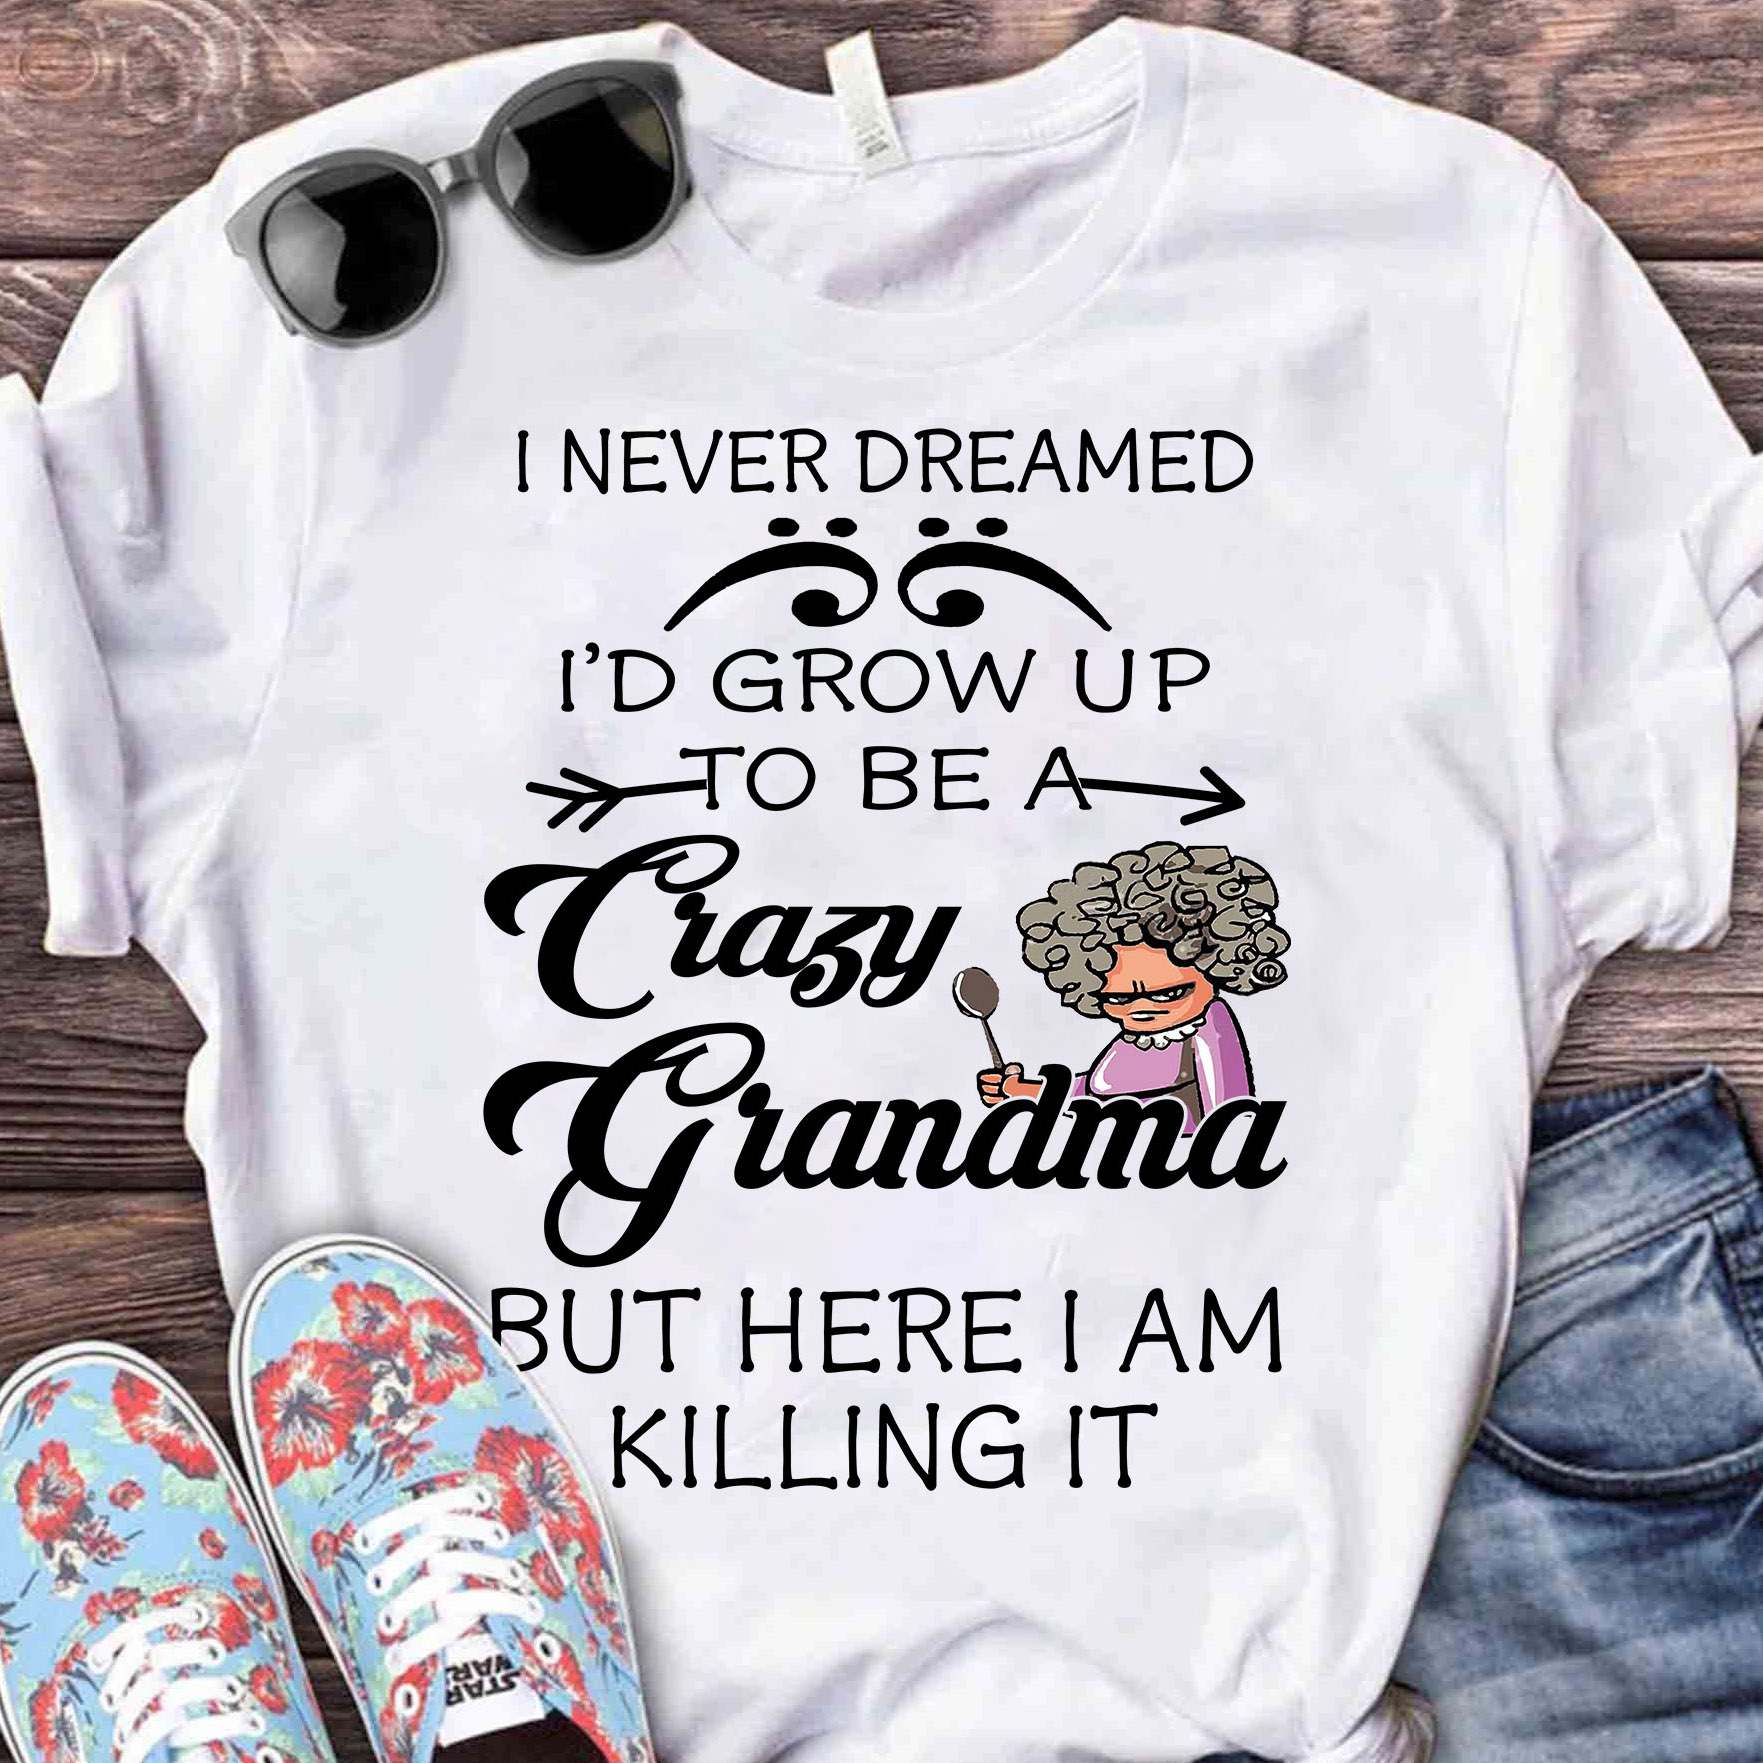 I never dreamed I'd grow up to be a crazy grandma but here i am killing it